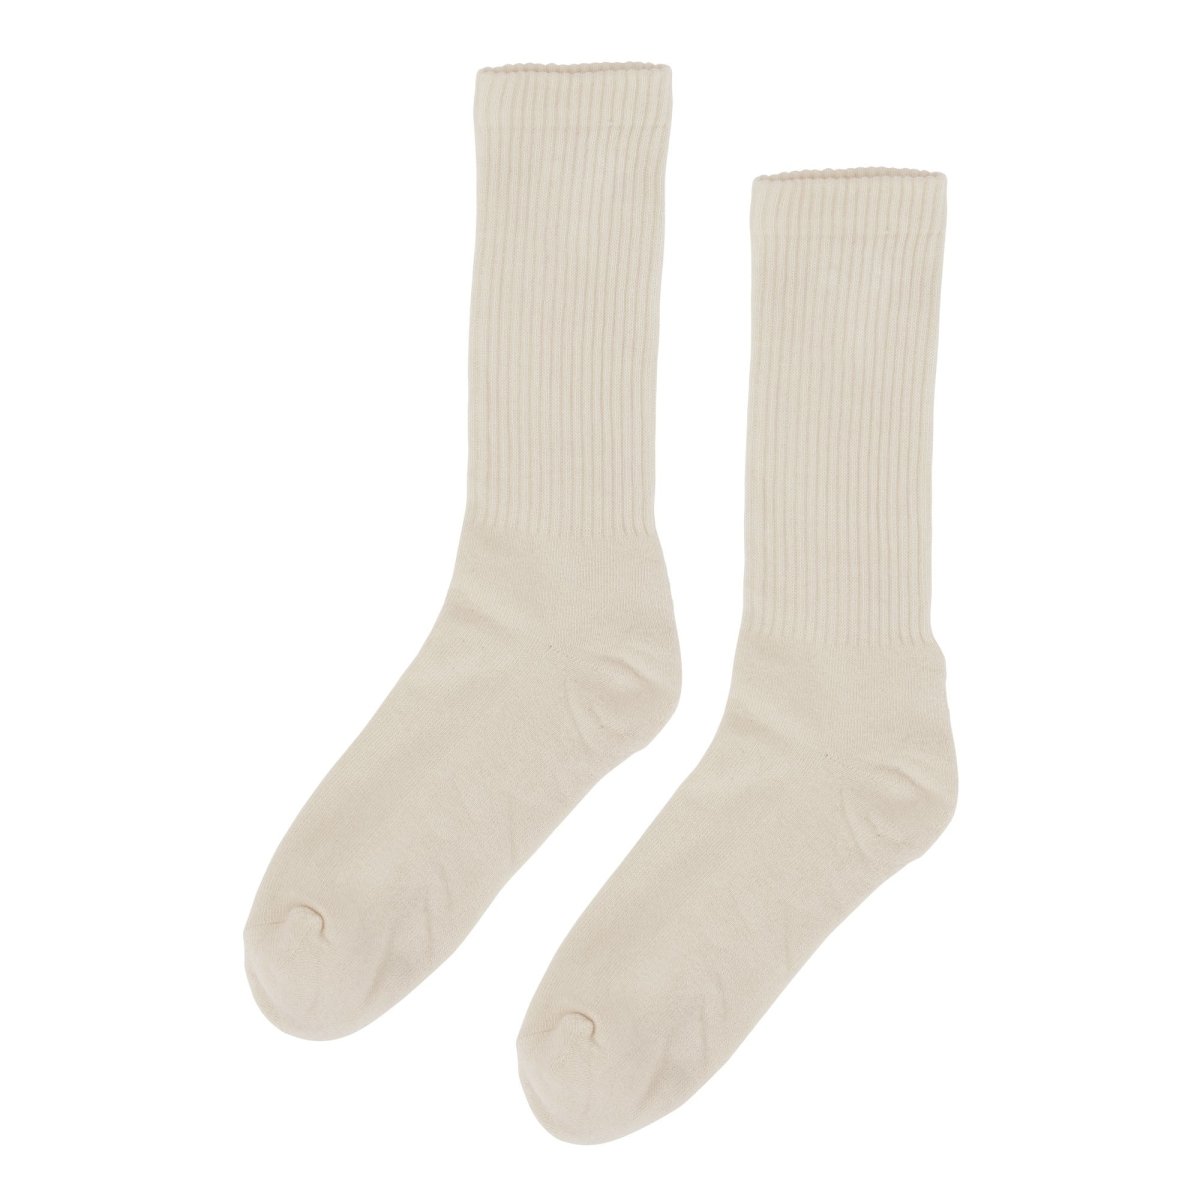 Organic Active Sock Ivory White - KYOTO - Colorful Standard